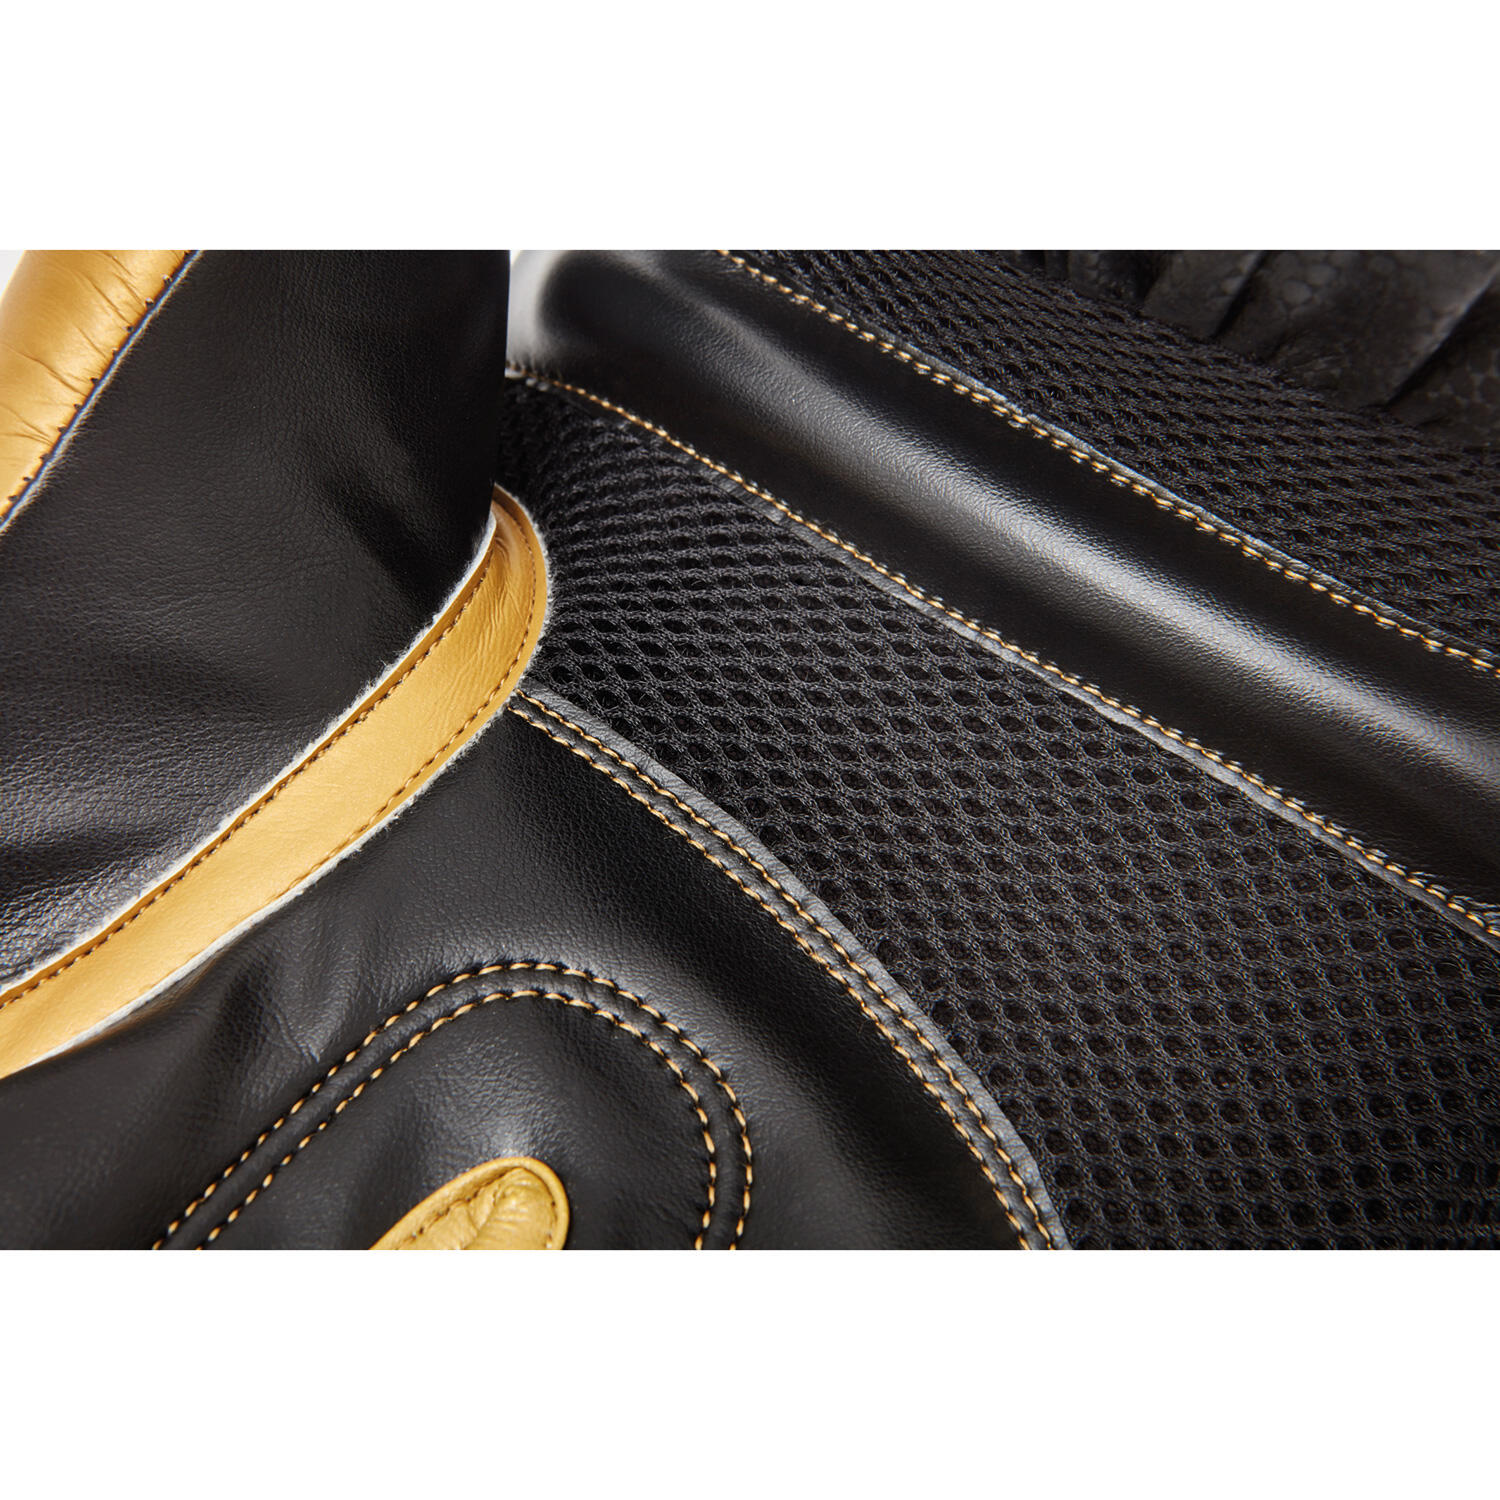 Reebok Boxing Gloves - Black and Gold 6/6